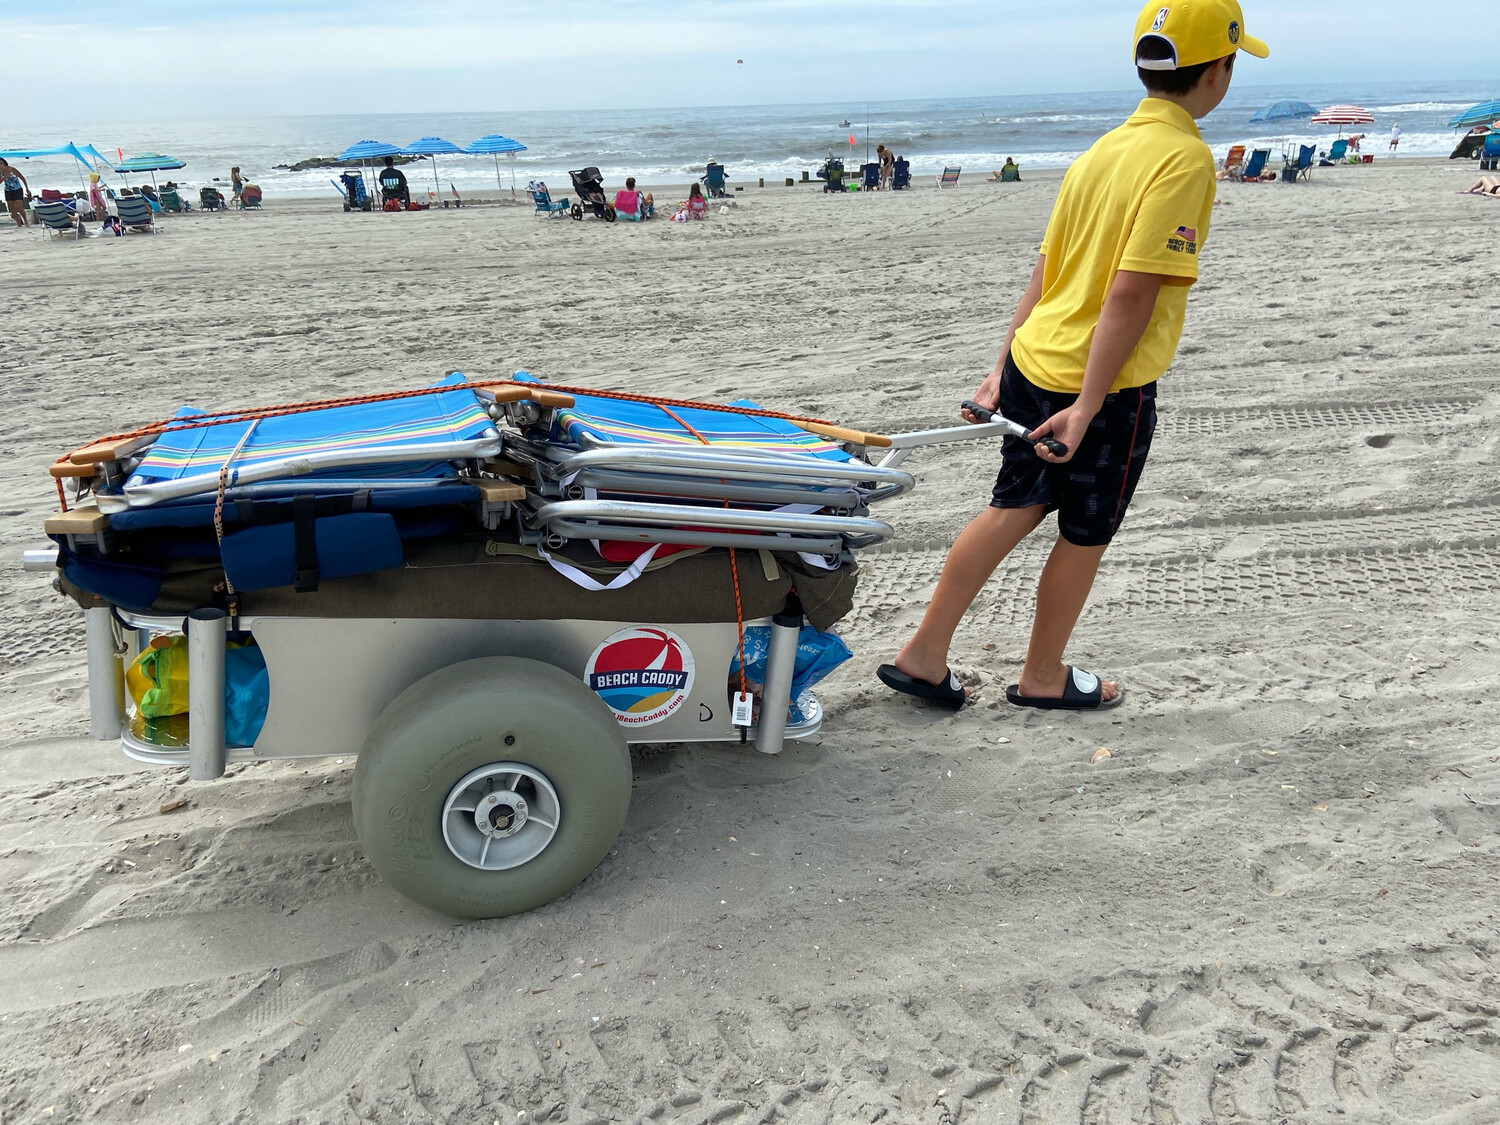 1 Week Beach Cart Rental (Free Delivery and Pickup)